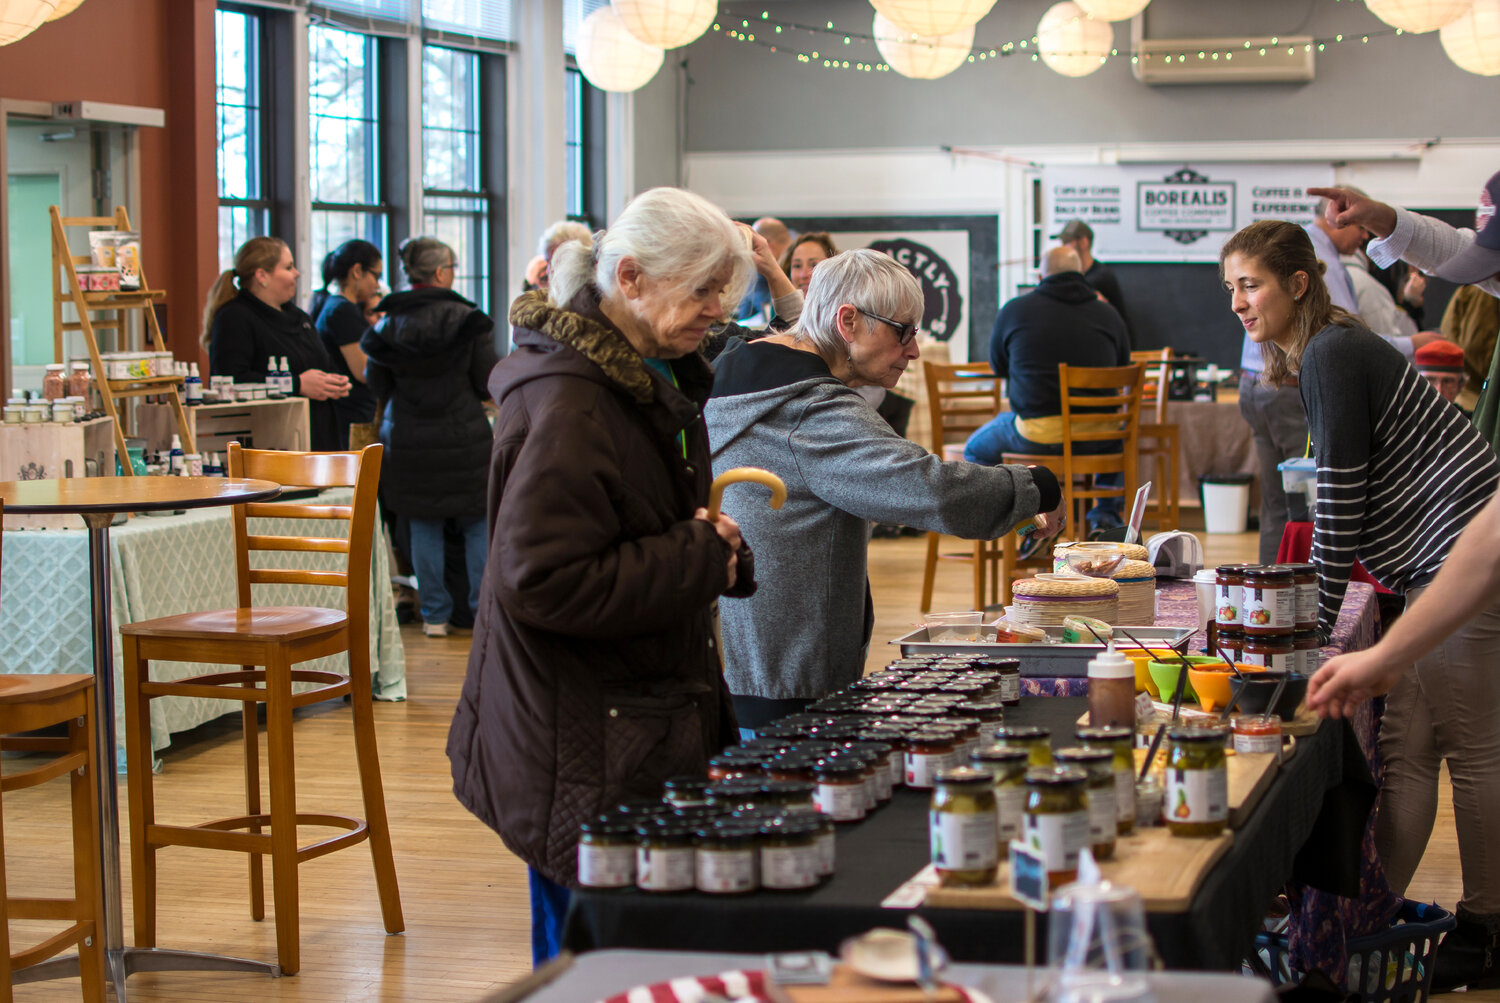 Shoppers browse products from Hope & Main’s many food makers